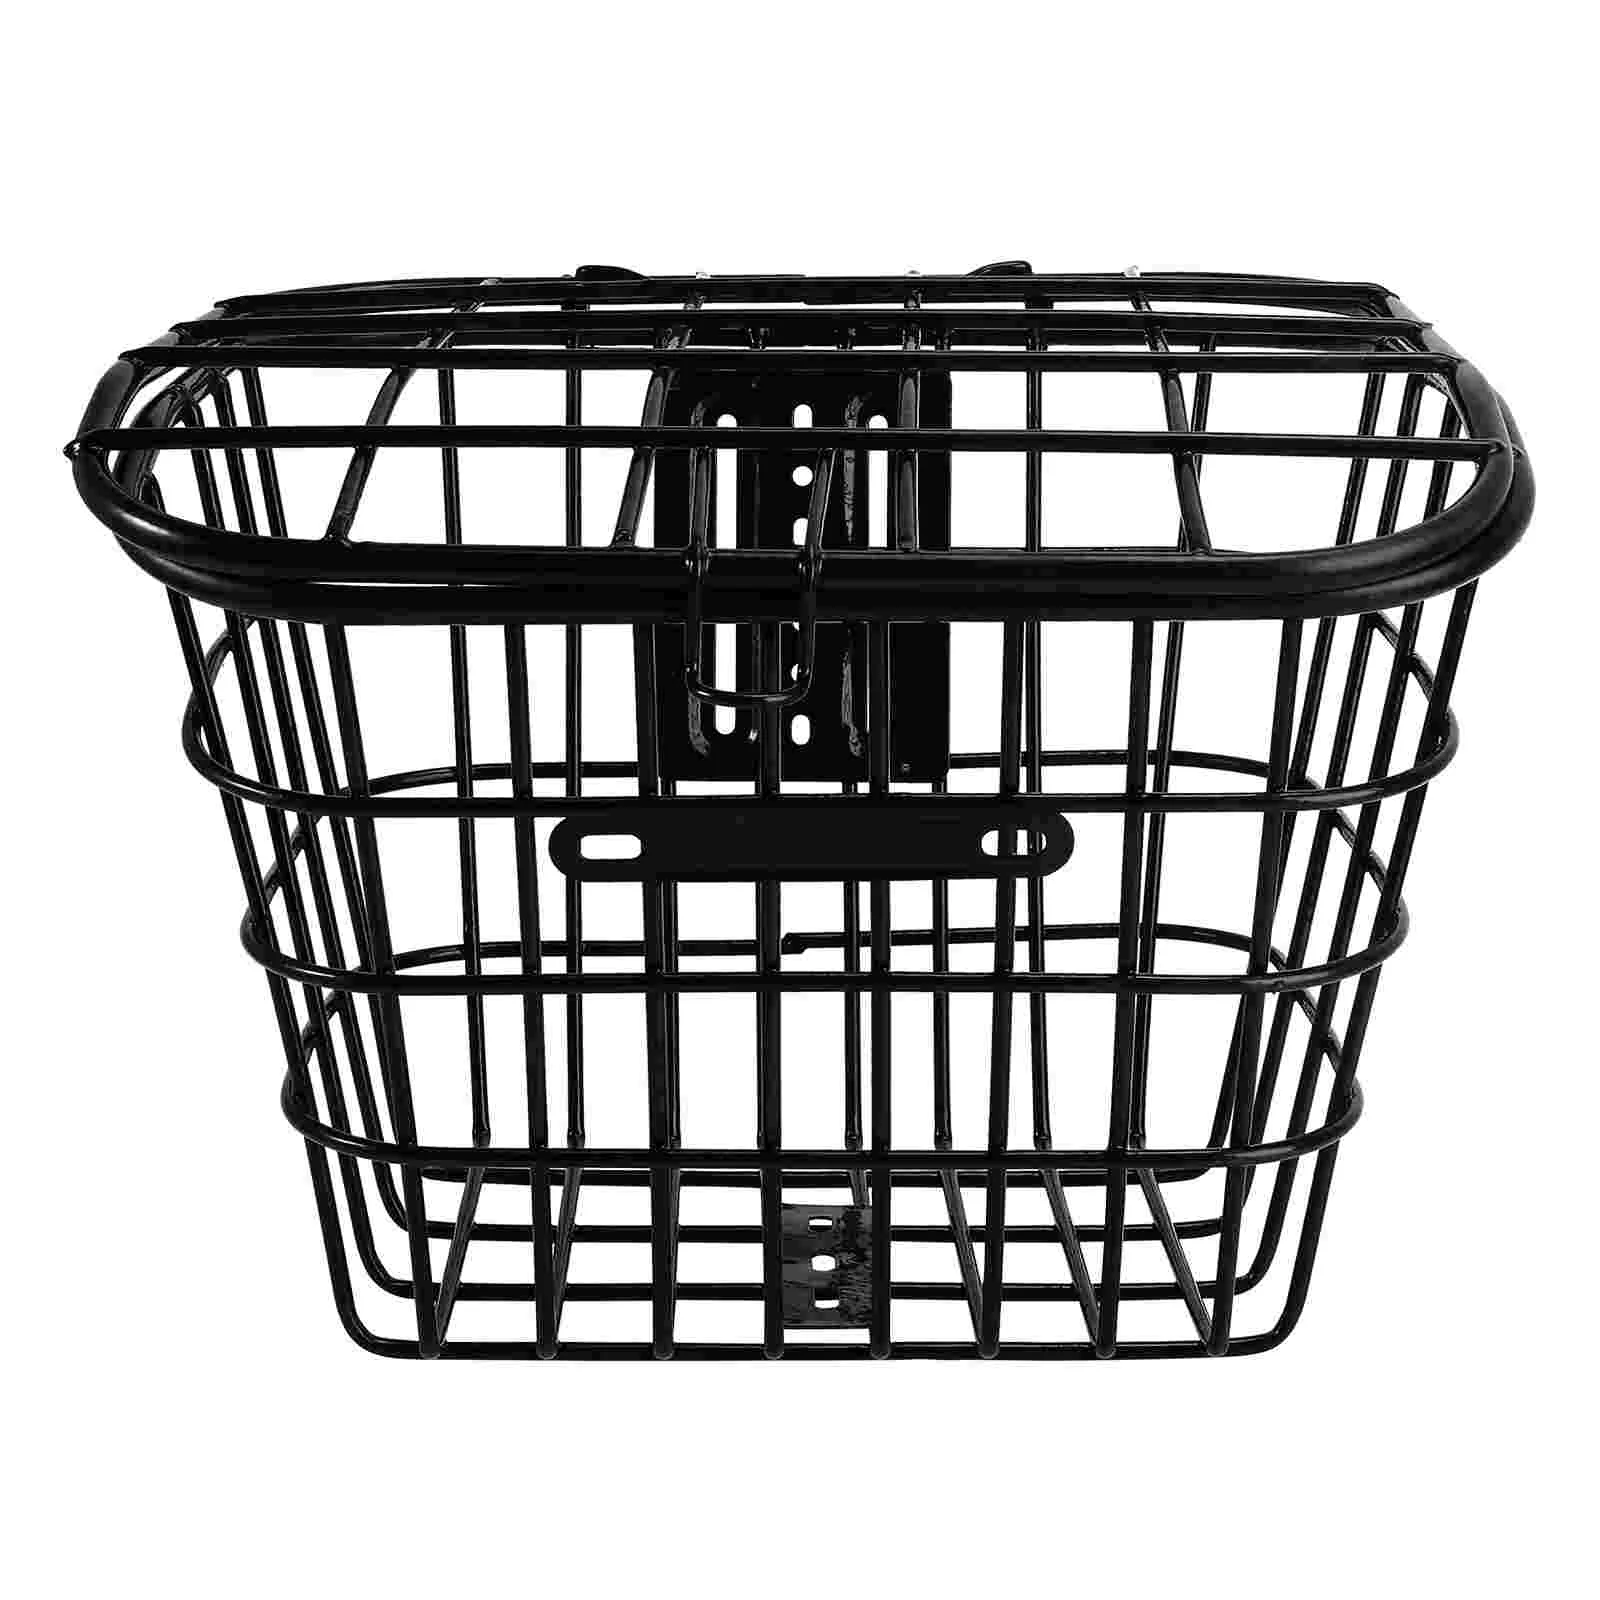 

Bicycle Folding Basket Small Storage Simple Container Plain Color Front Practical Gadget Stainless Steel Corrosion Proof Miss